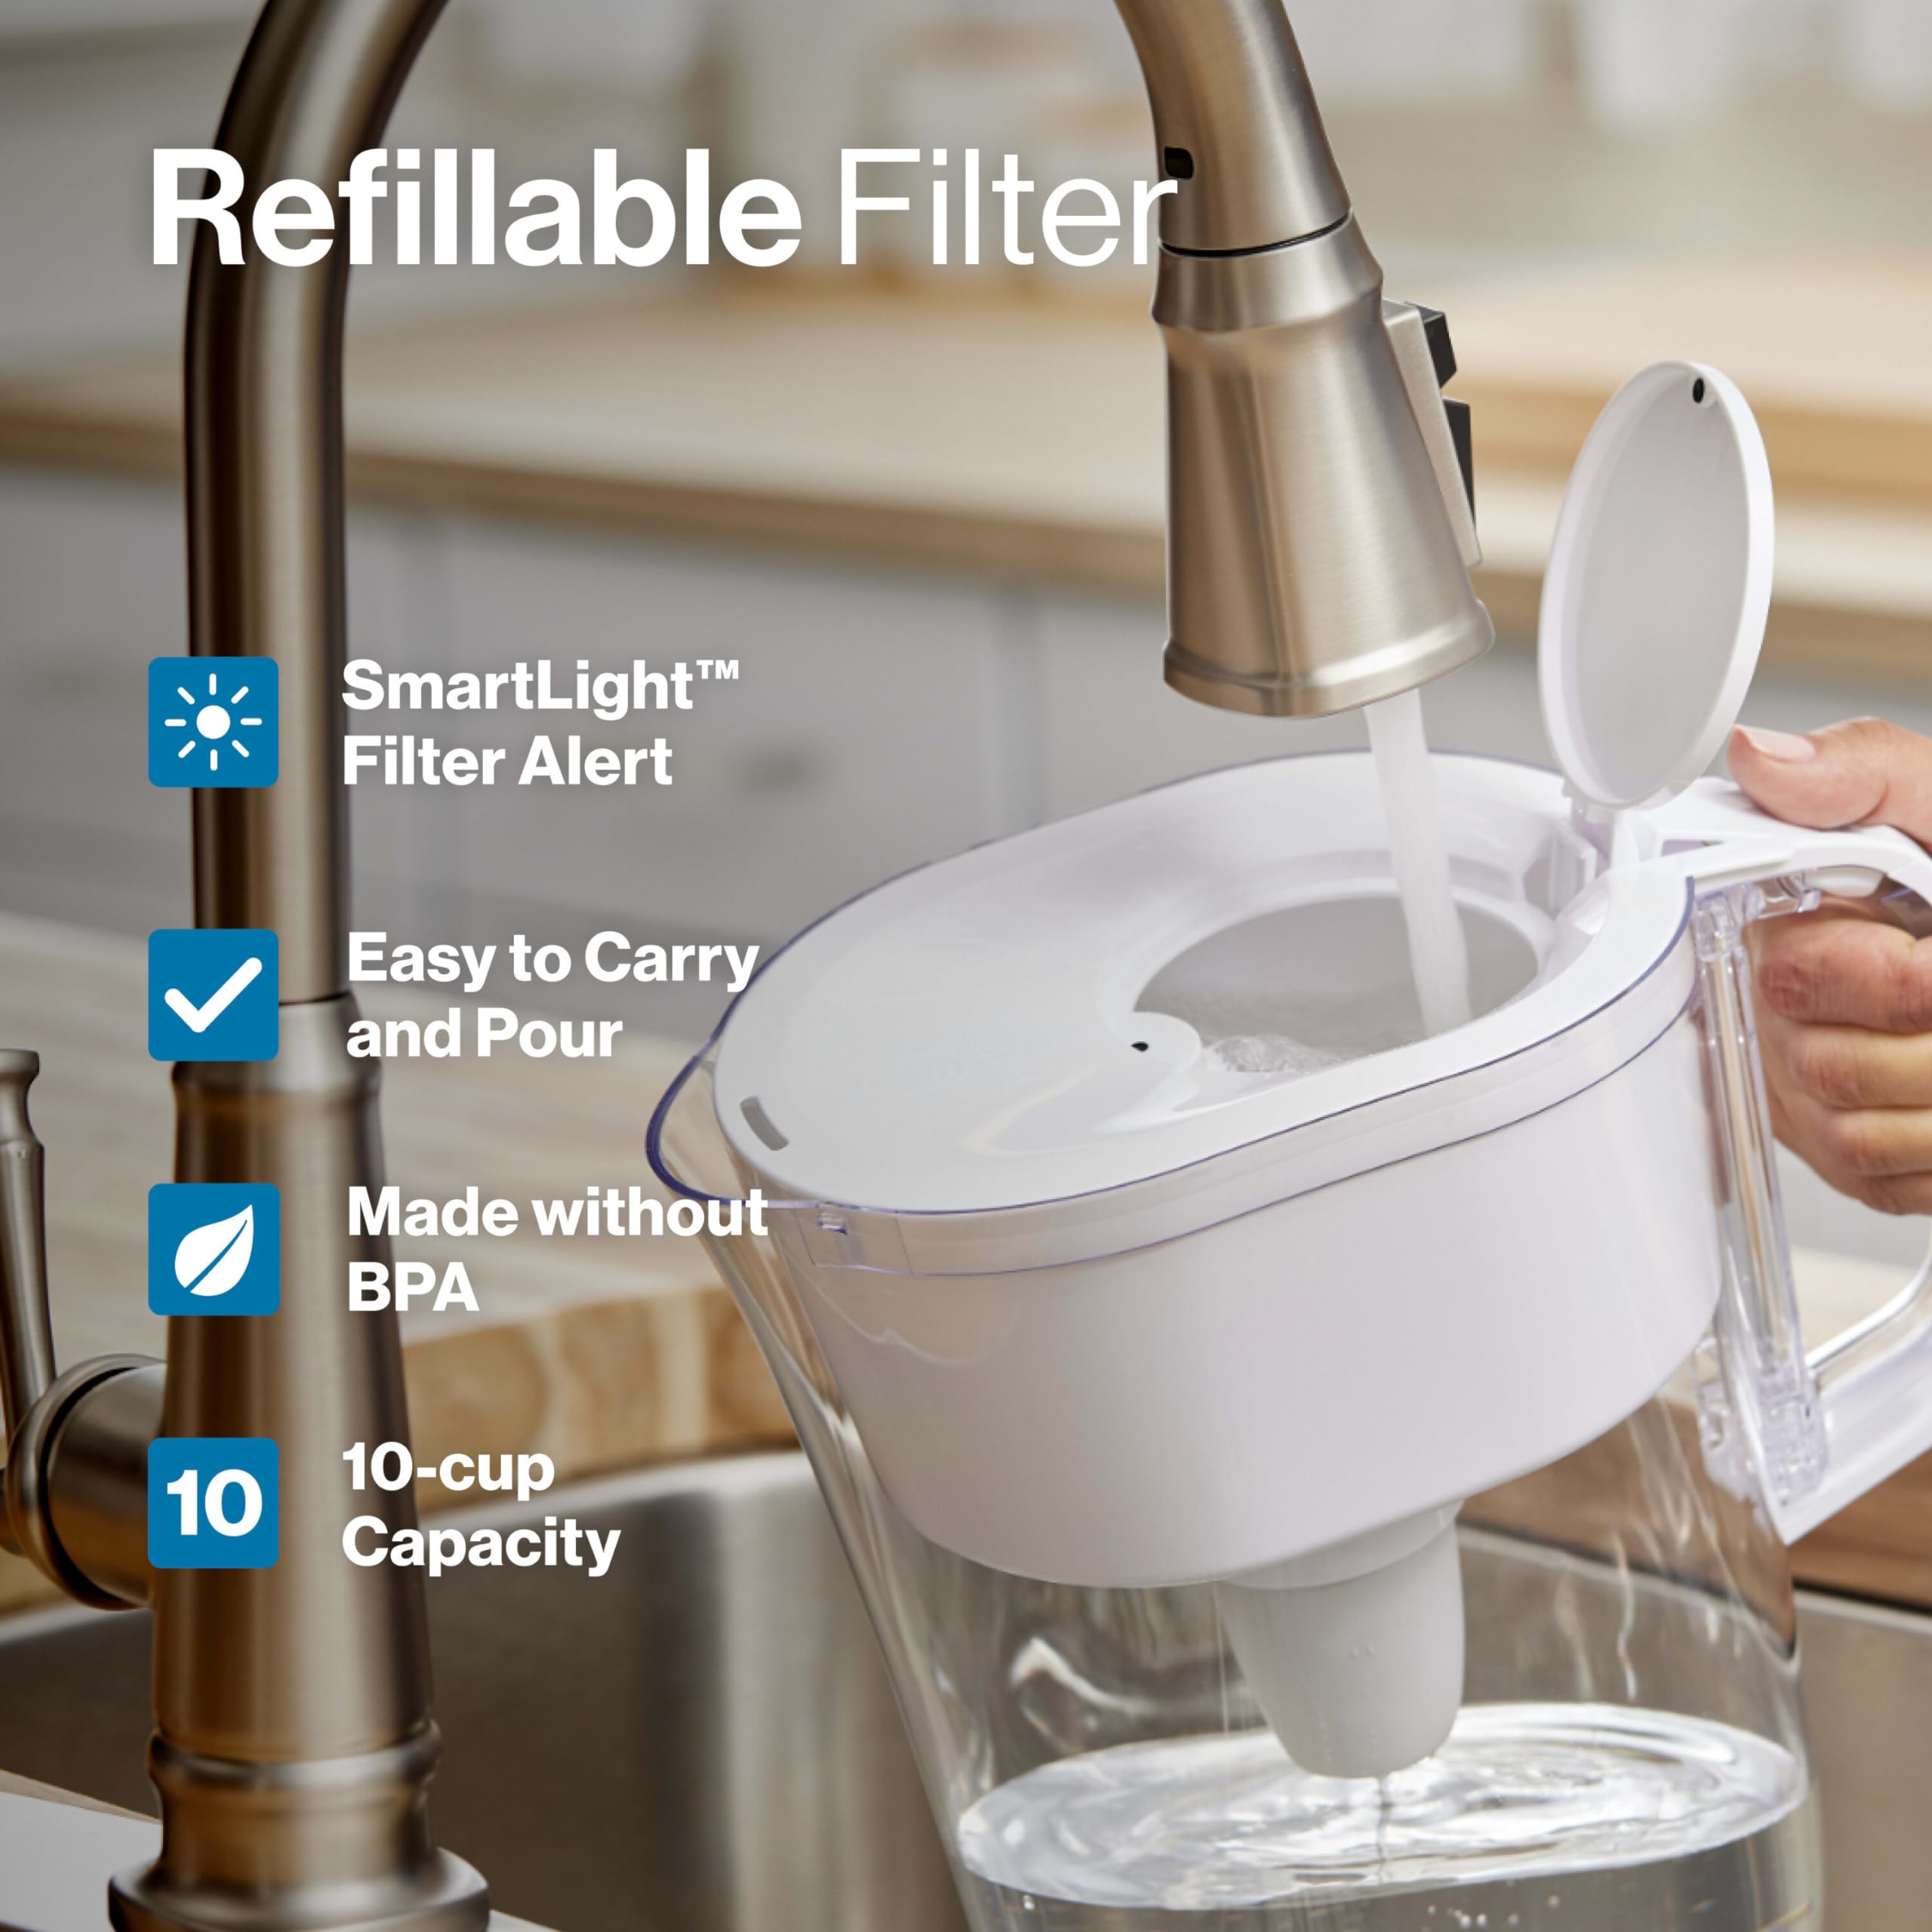 Brita NEW Refillable Filter Refill Packs for Pitchers and Dispensers, 80% Less Plastic*, Lasts 2 Months, 6 Count